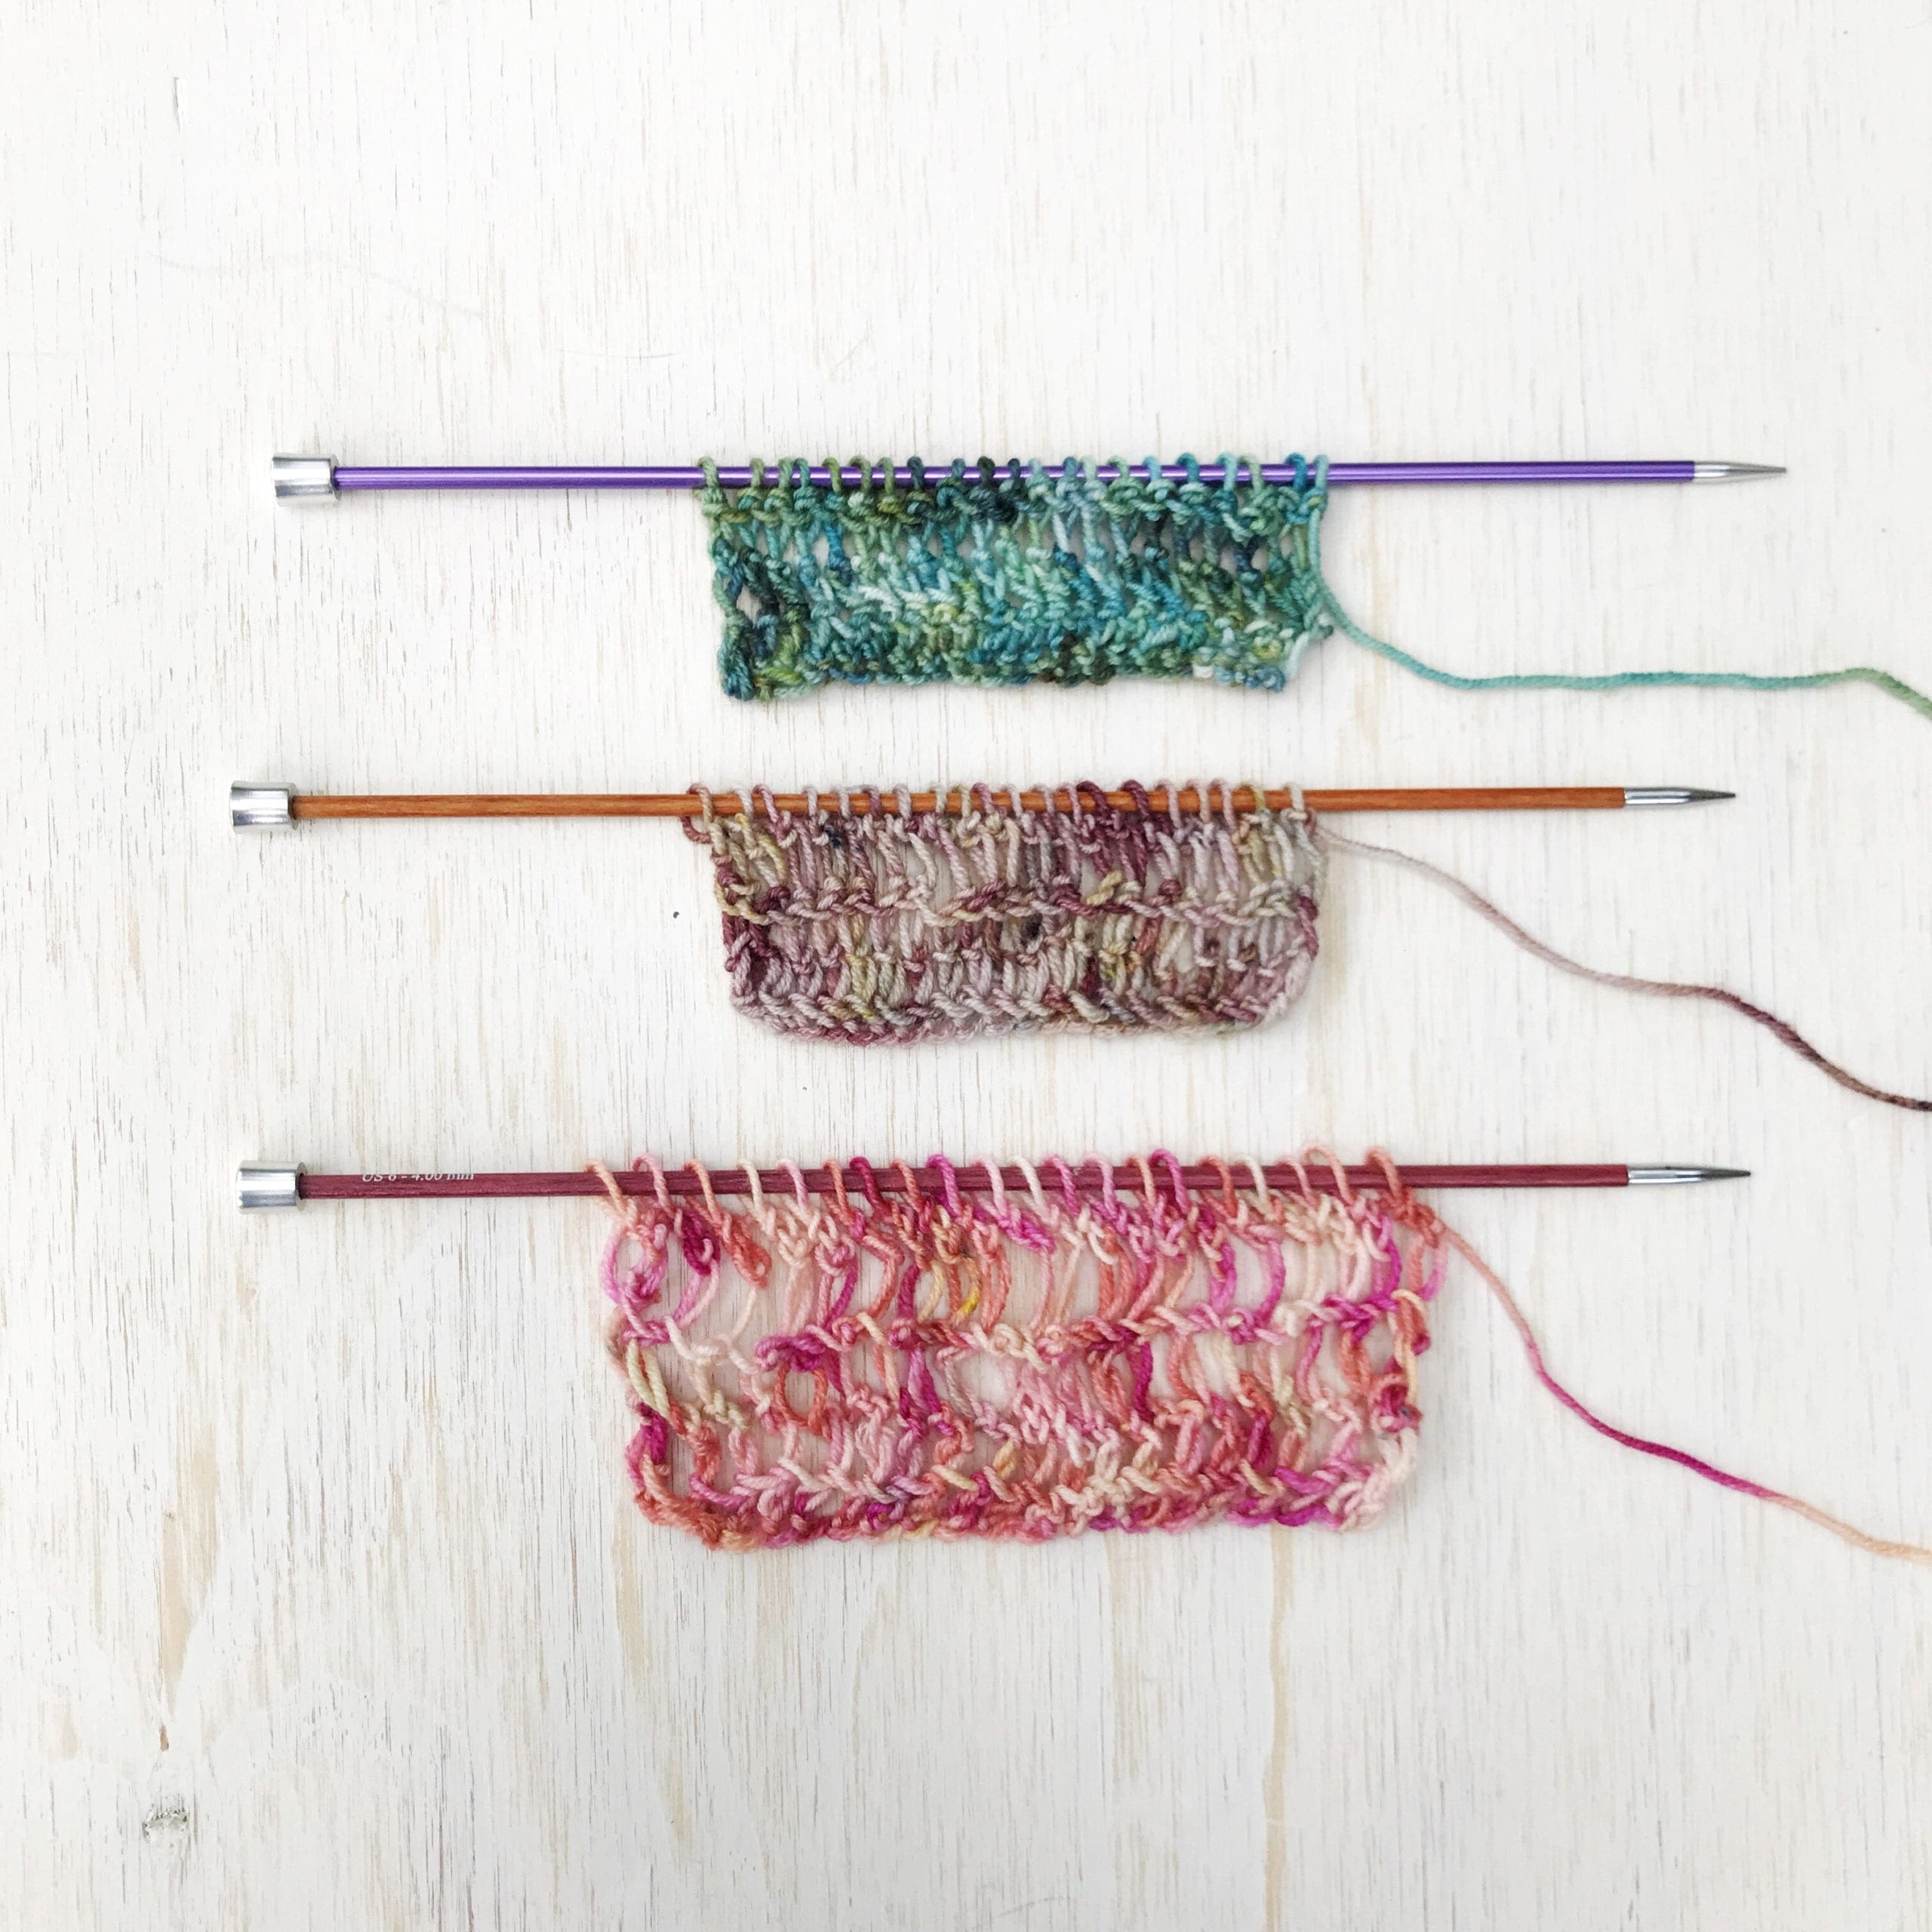 KNITTING NEEDLES FOR BEGINNERS - Knitty Gritty